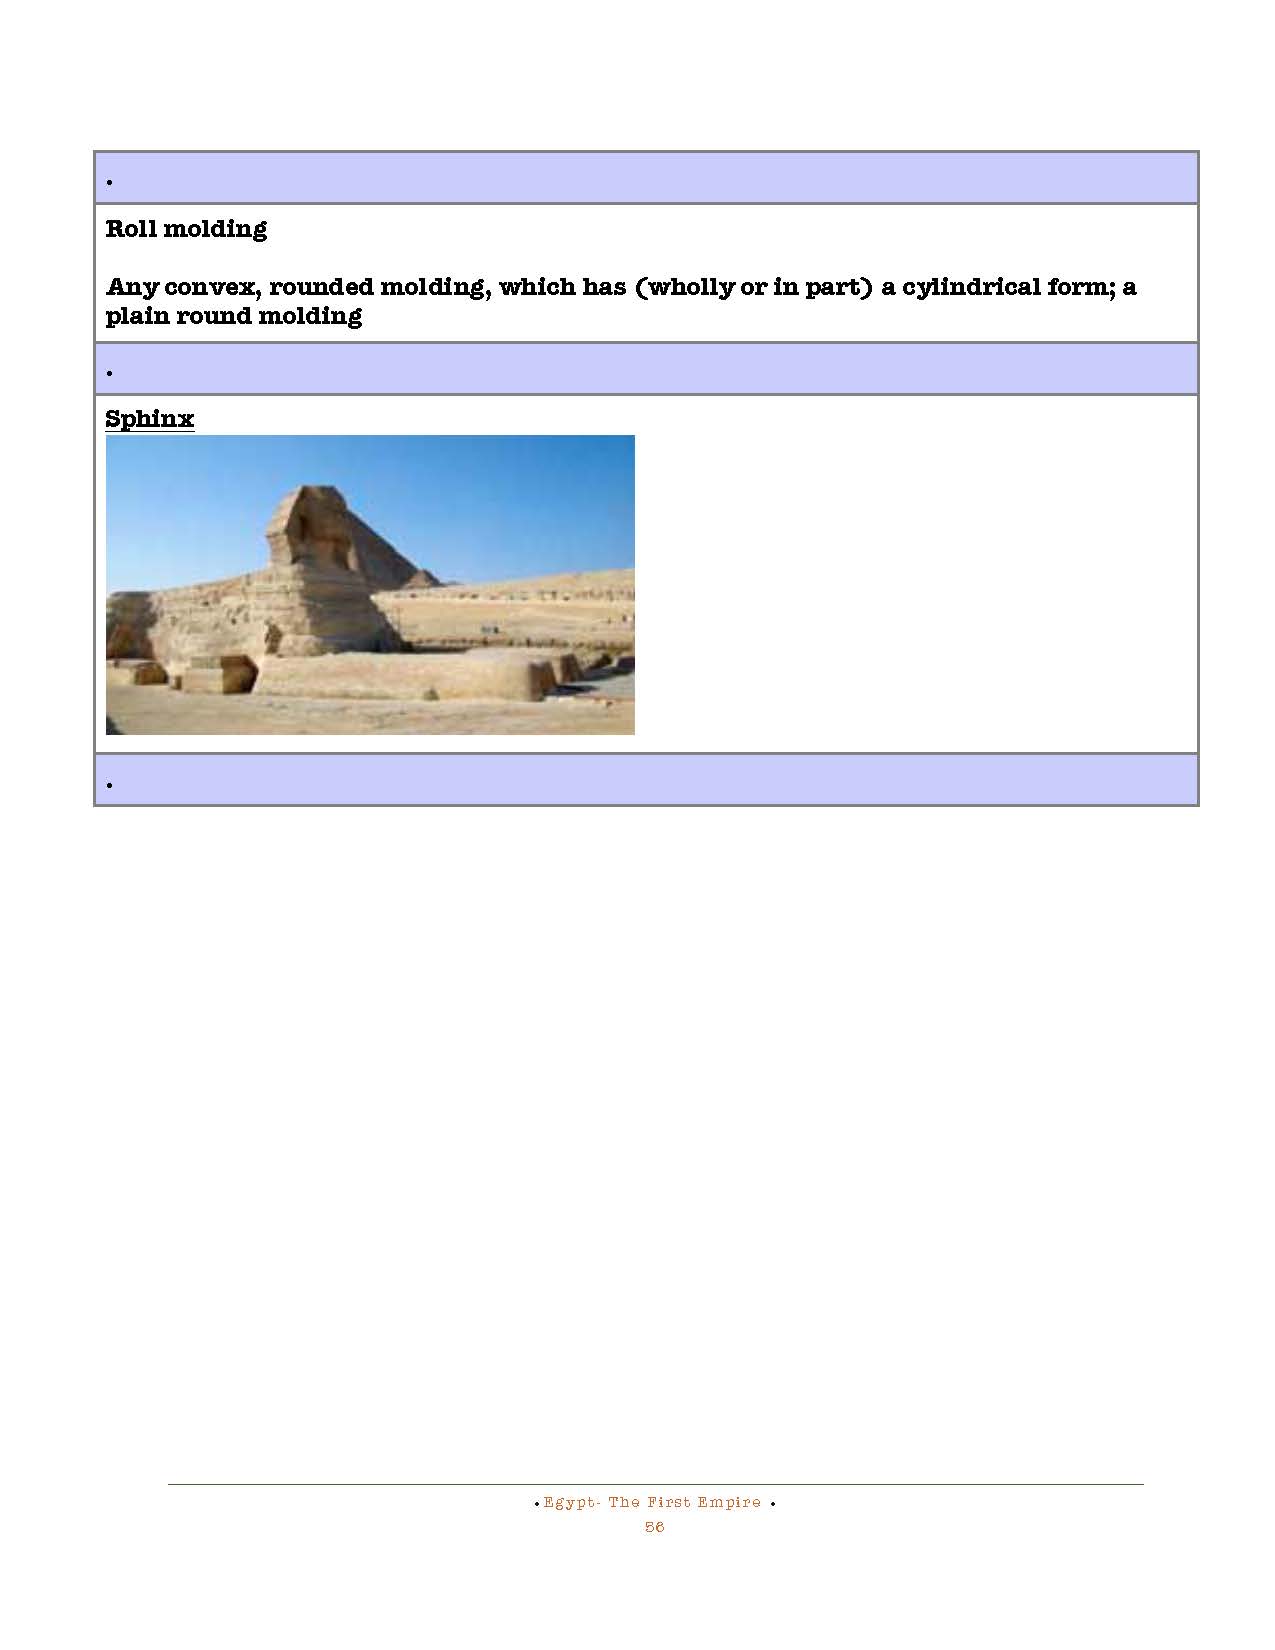 HOCE- Egypt  (First Empire) Notes_Page_056.jpg